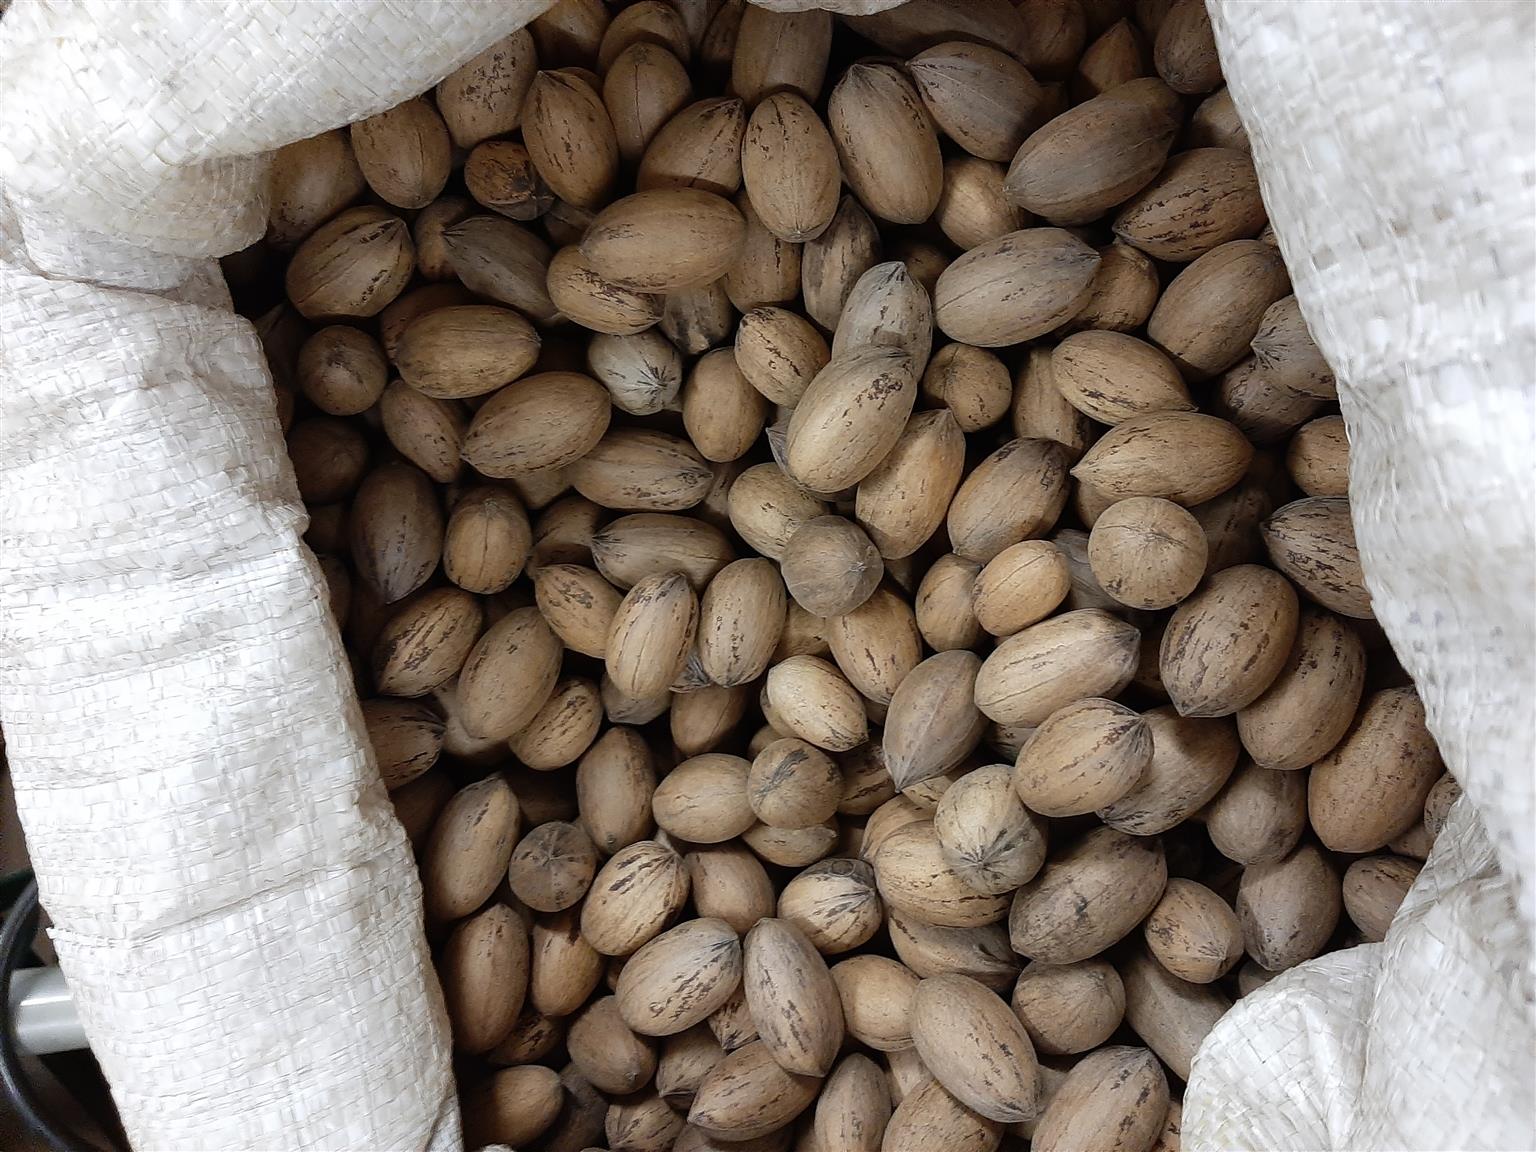 Quality Pecan Nuts (in shells) For Sale